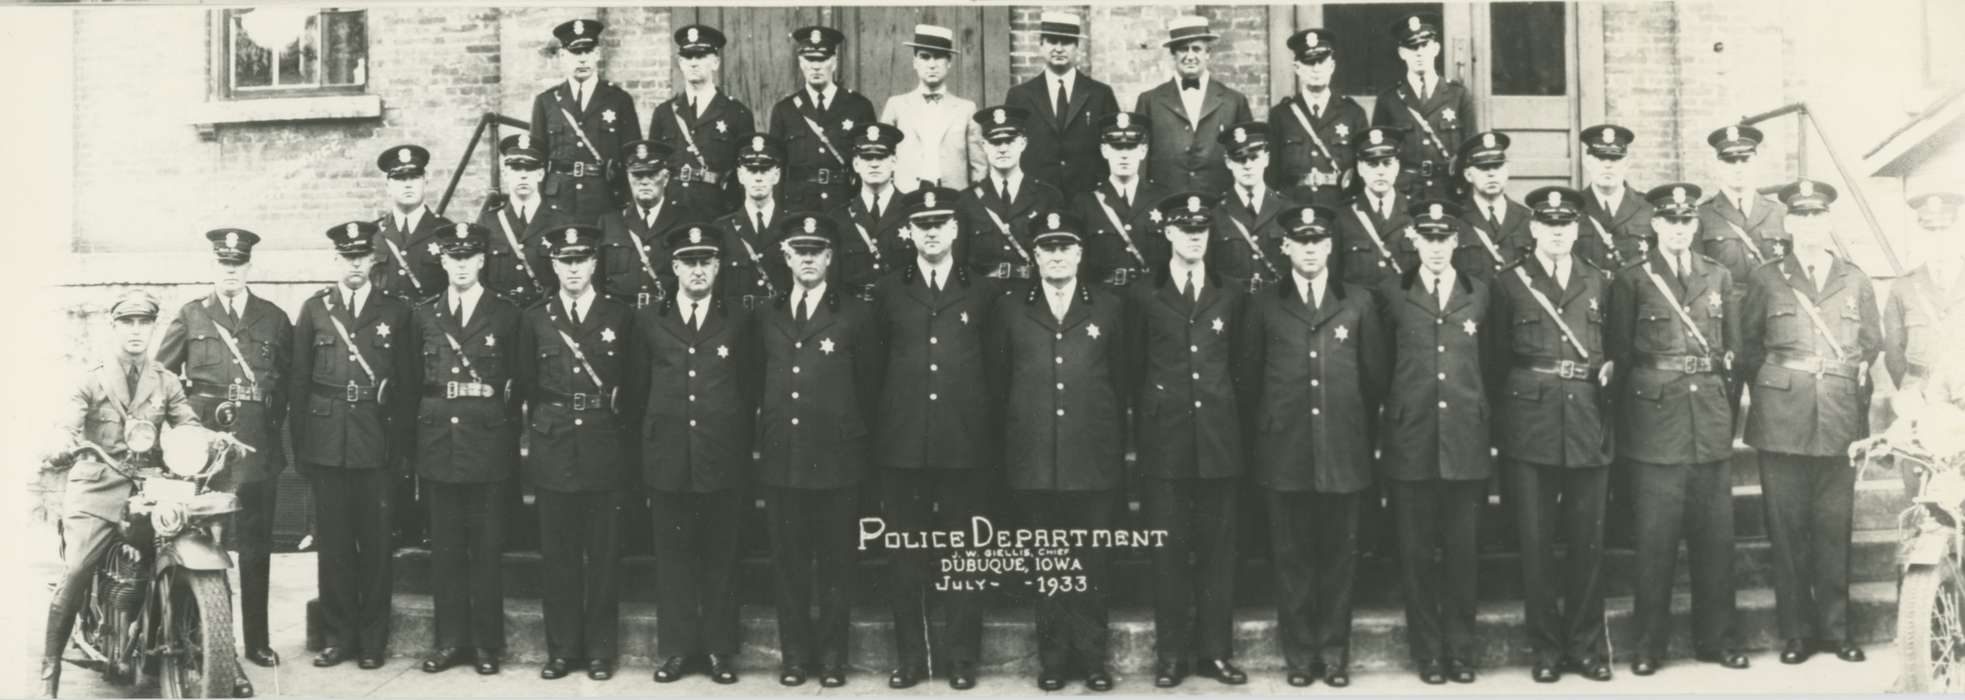 uniform, Portraits - Group, history of Iowa, Iowa History, Cities and Towns, Whitfield, Carla & Richard, Dubuque, IA, Labor and Occupations, police, motorcycle, Iowa